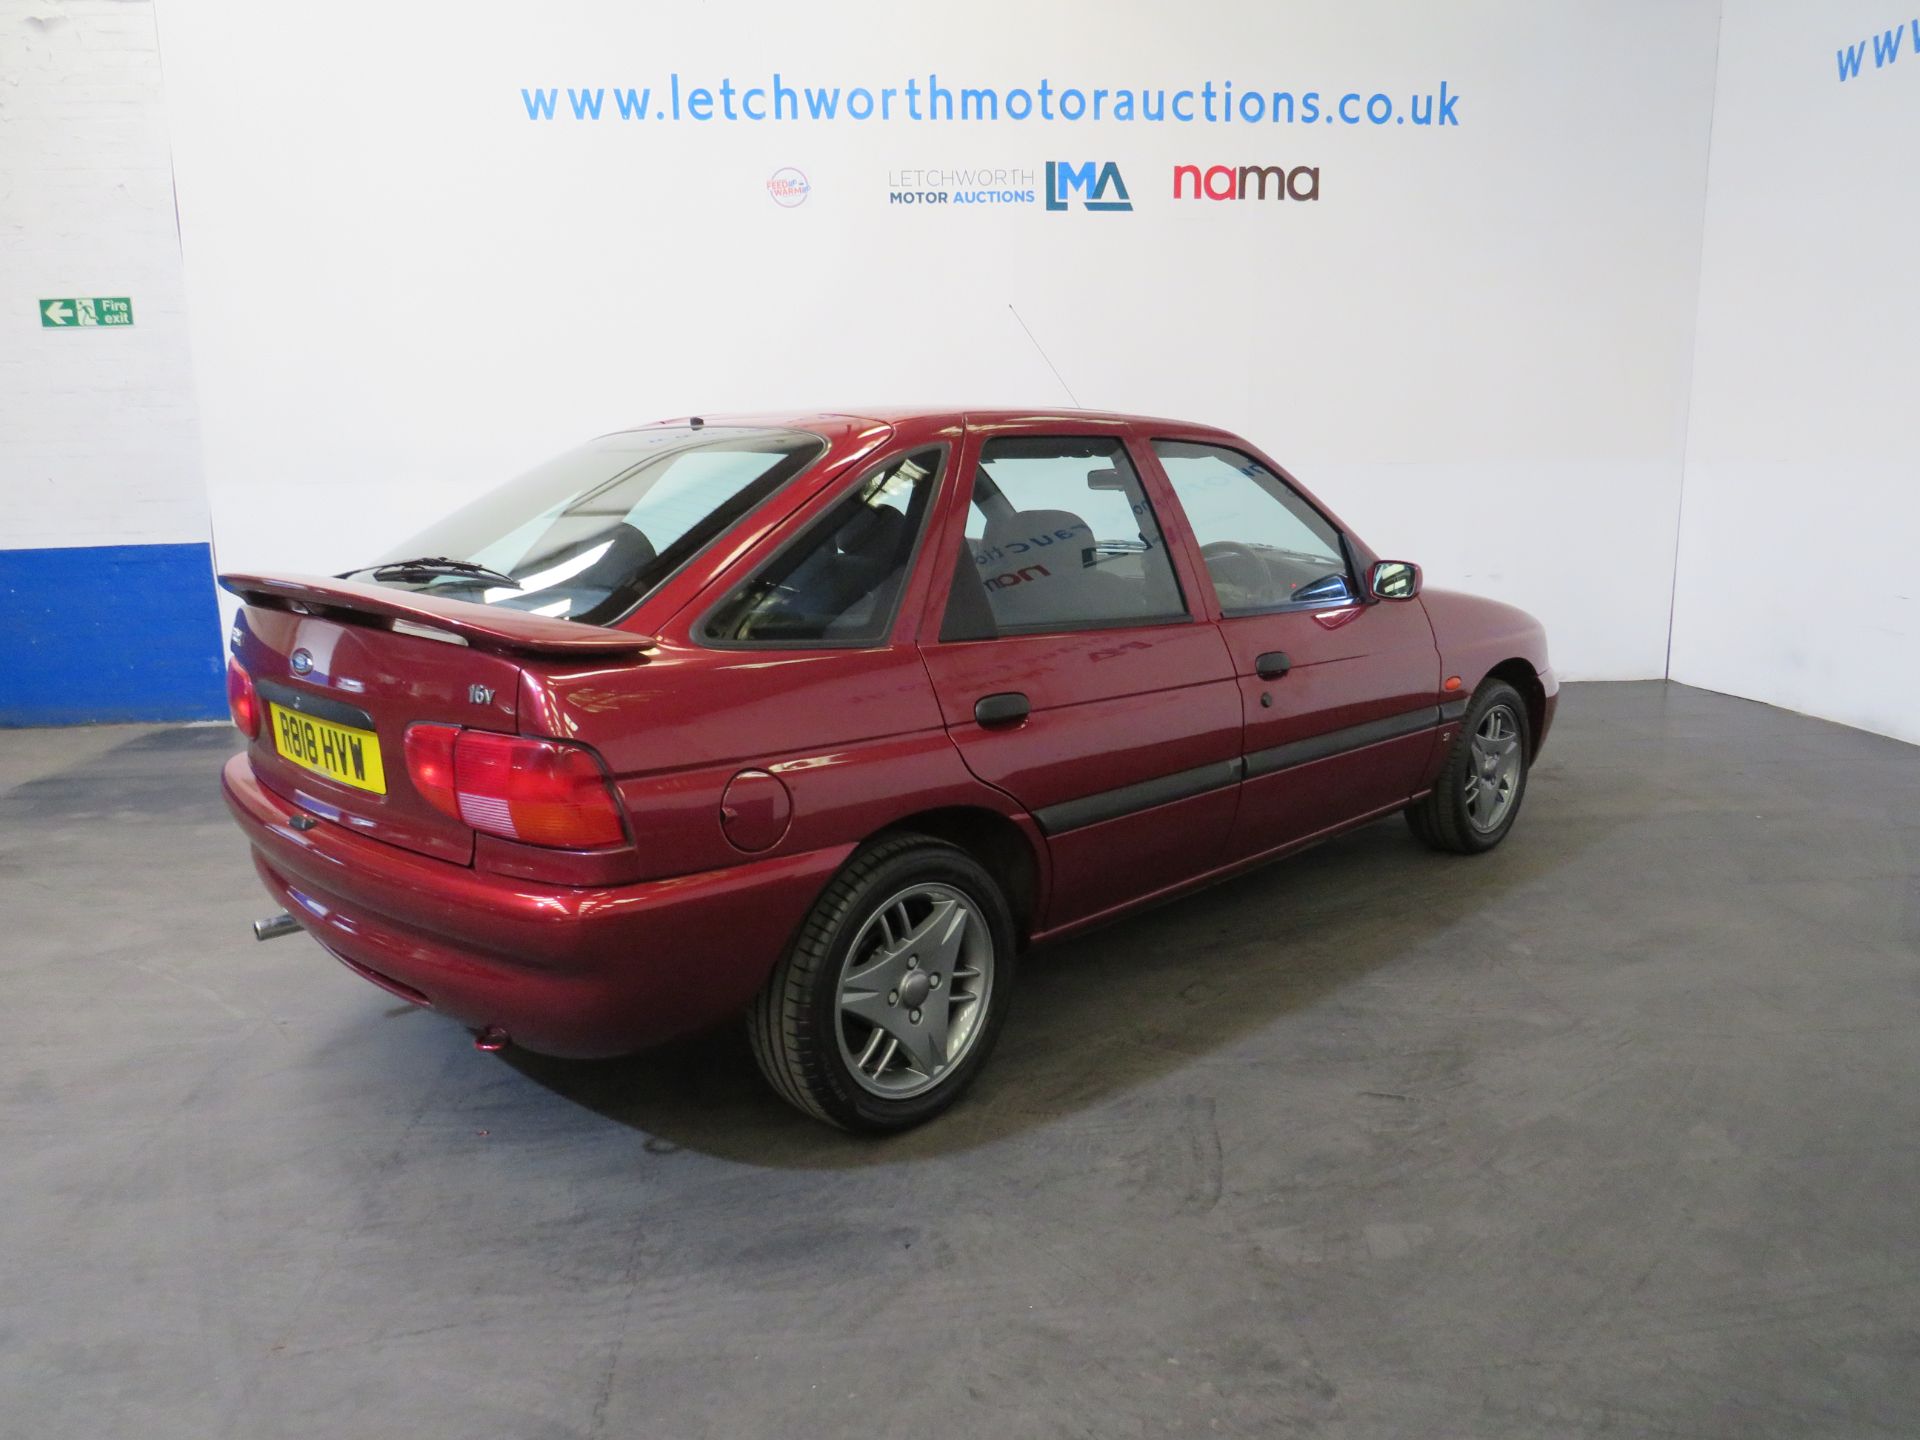 1998 Ford Escort SI -1597cc - Image 6 of 15